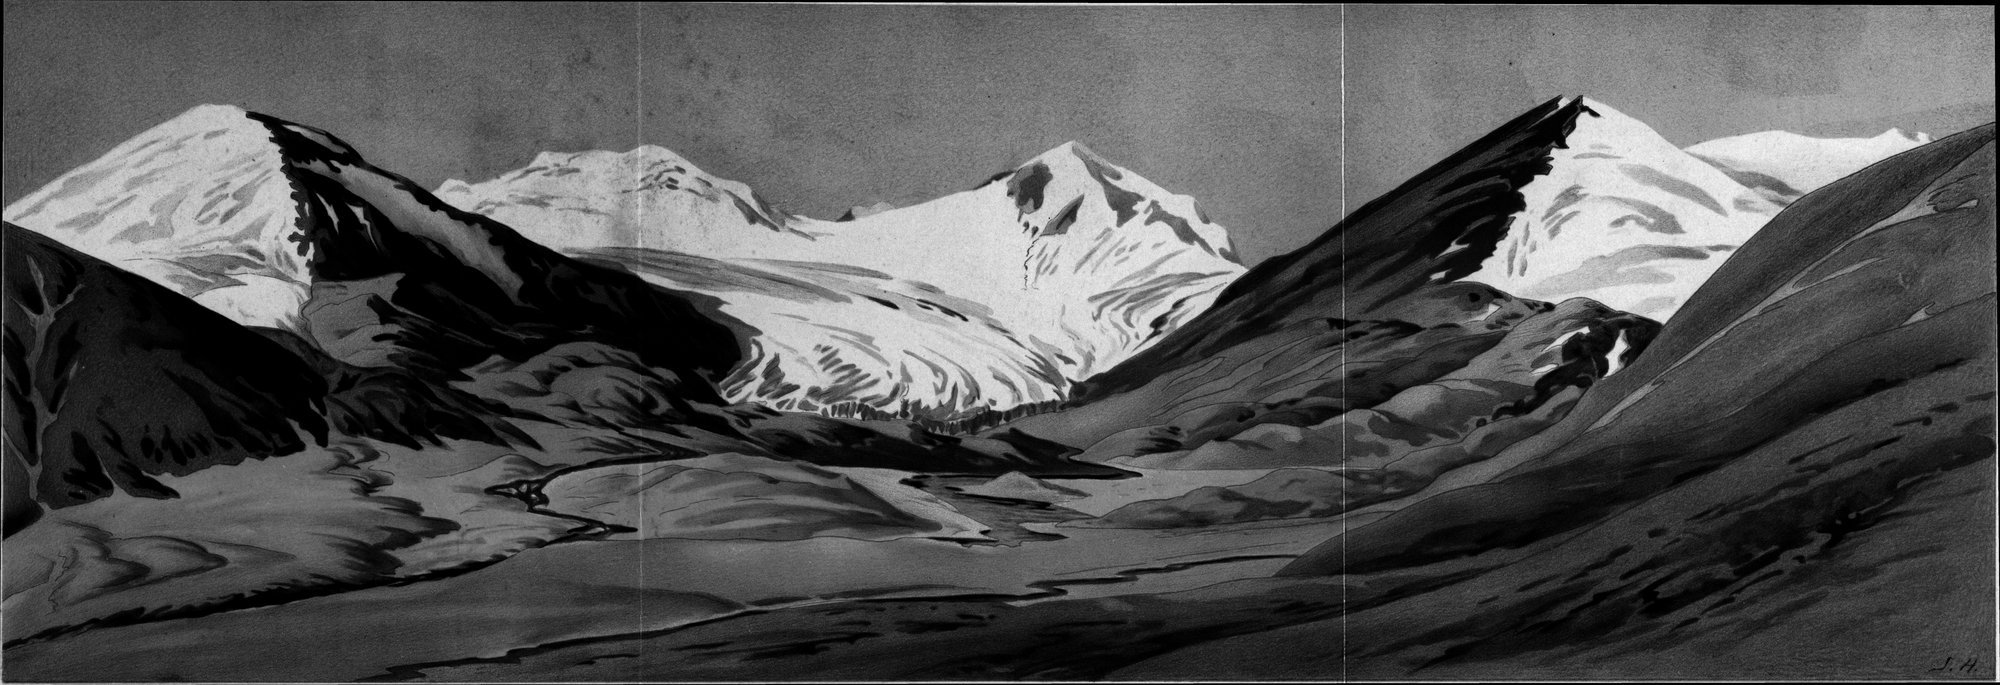 Southern Tibet : vol.3 / Page 585 (Grayscale High Resolution Image)